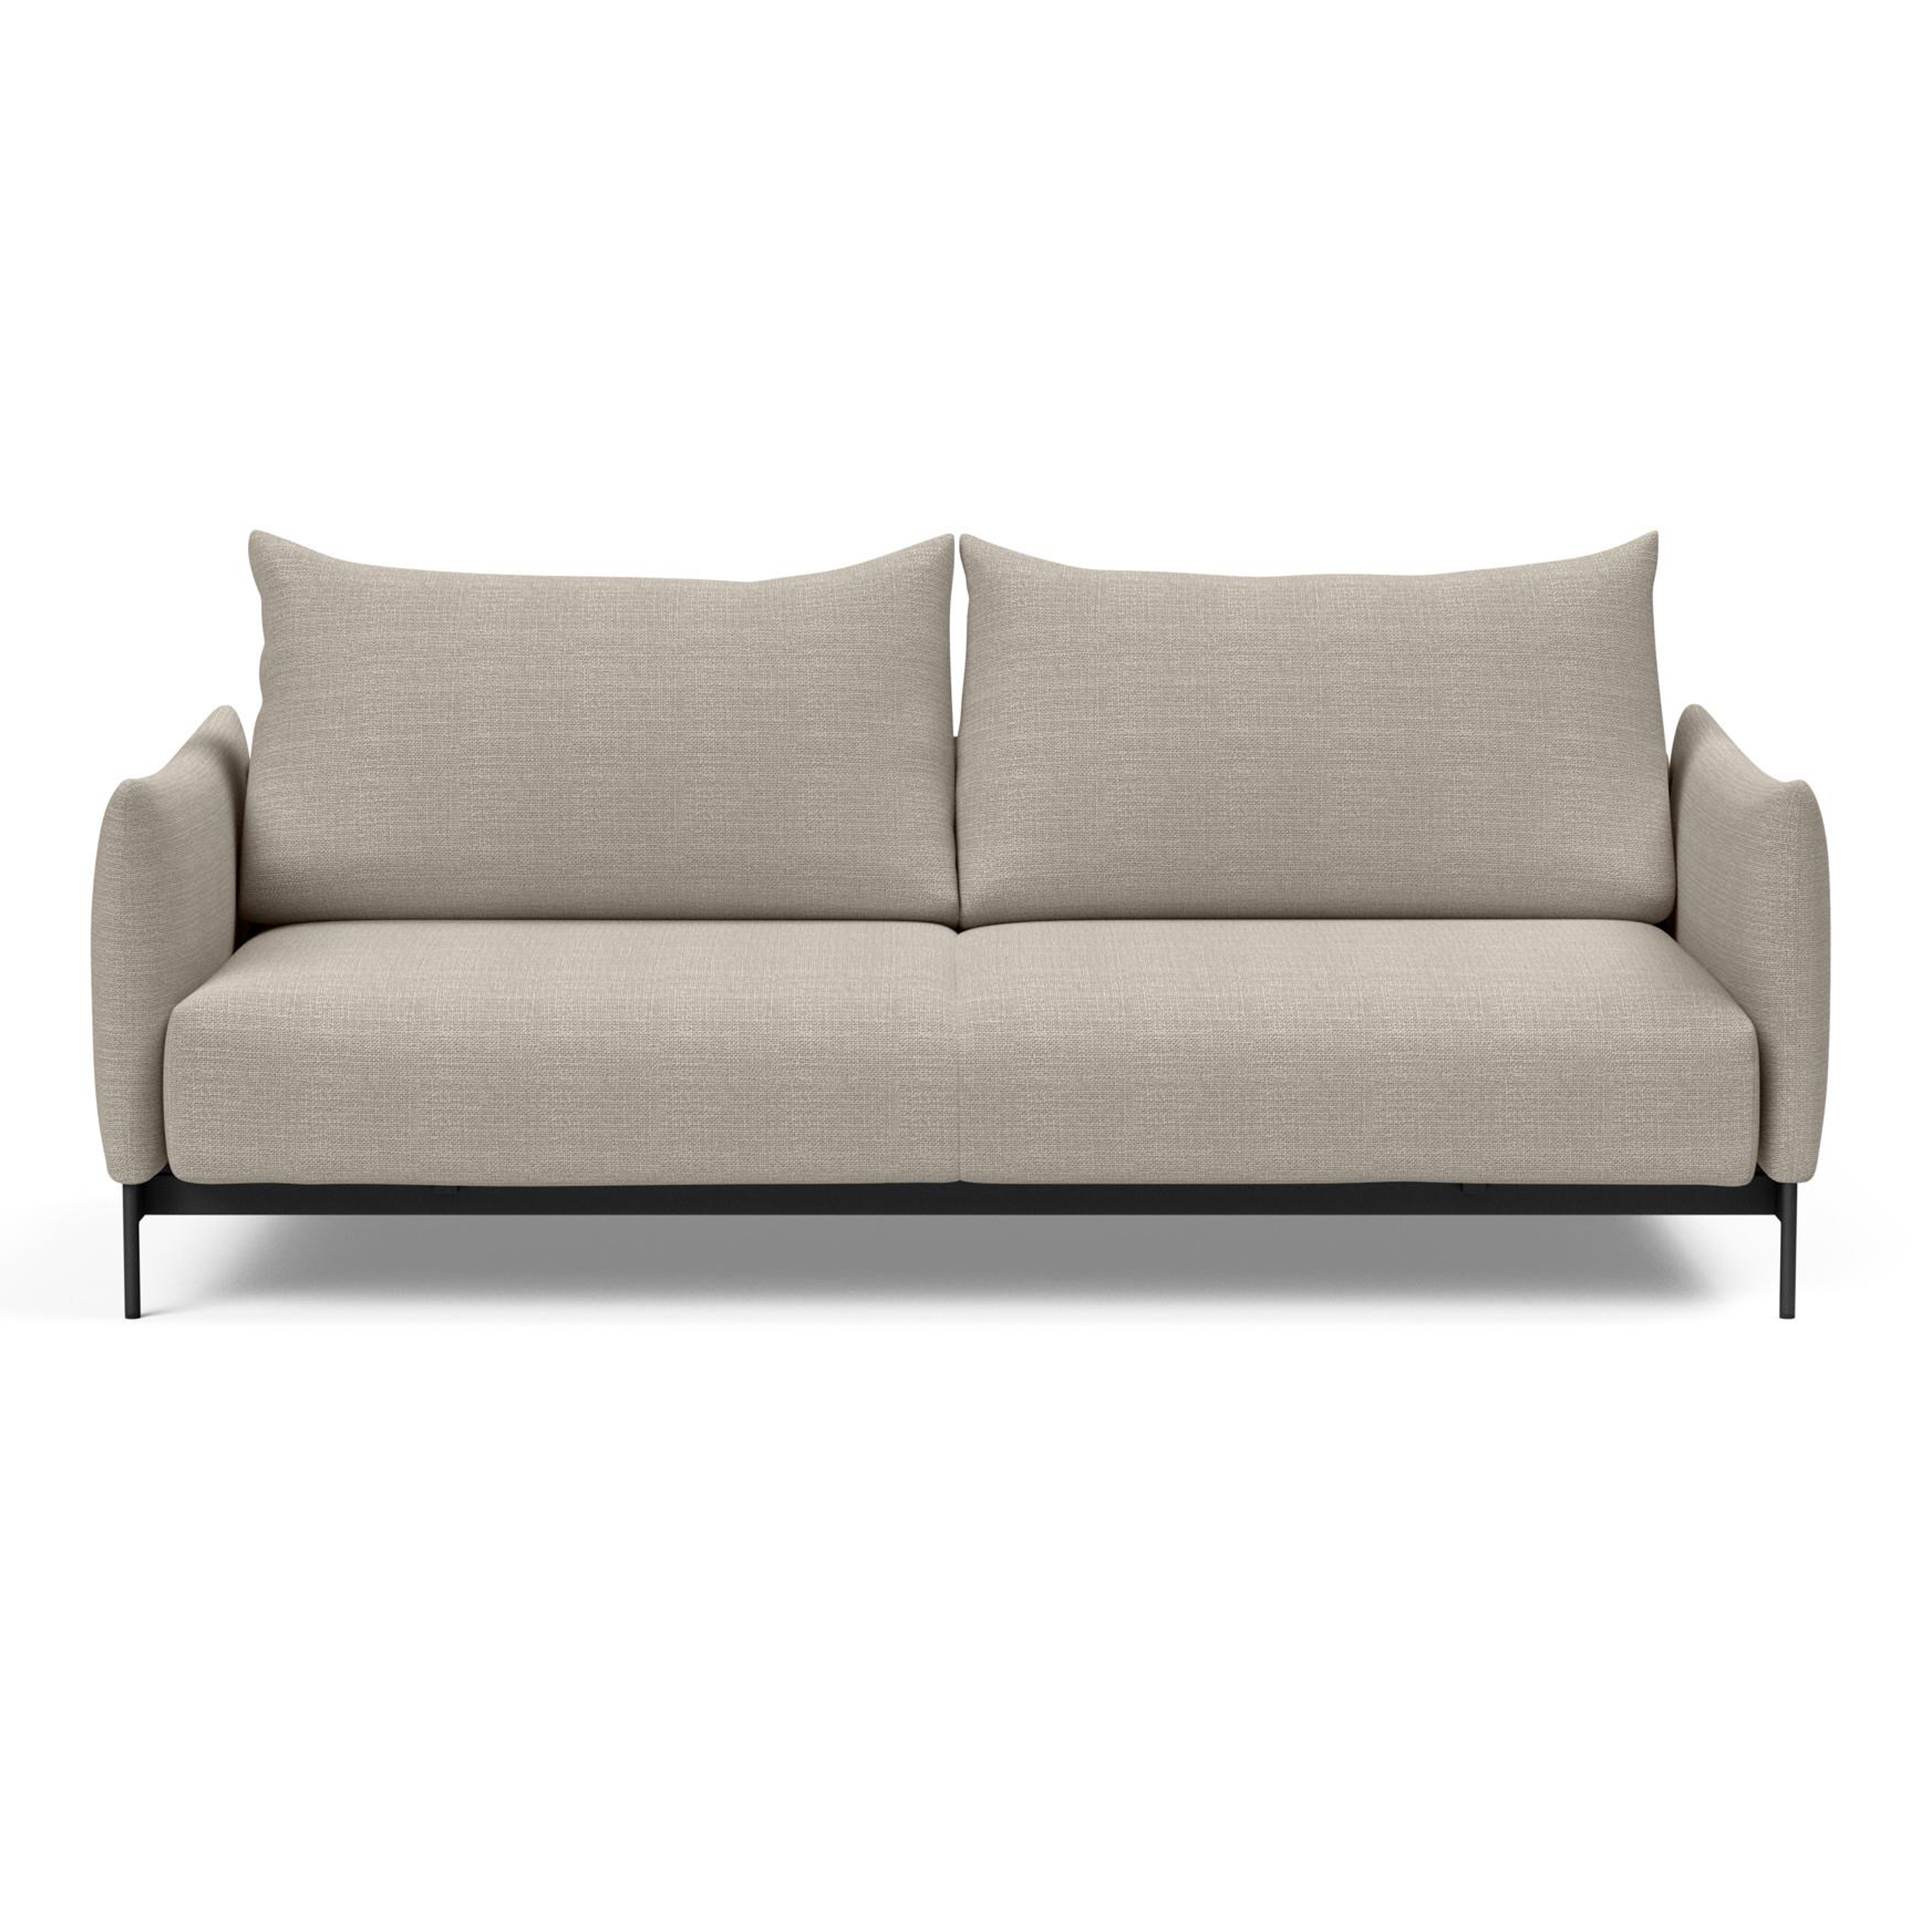 MALLOY SOFA BED WITH PUFF